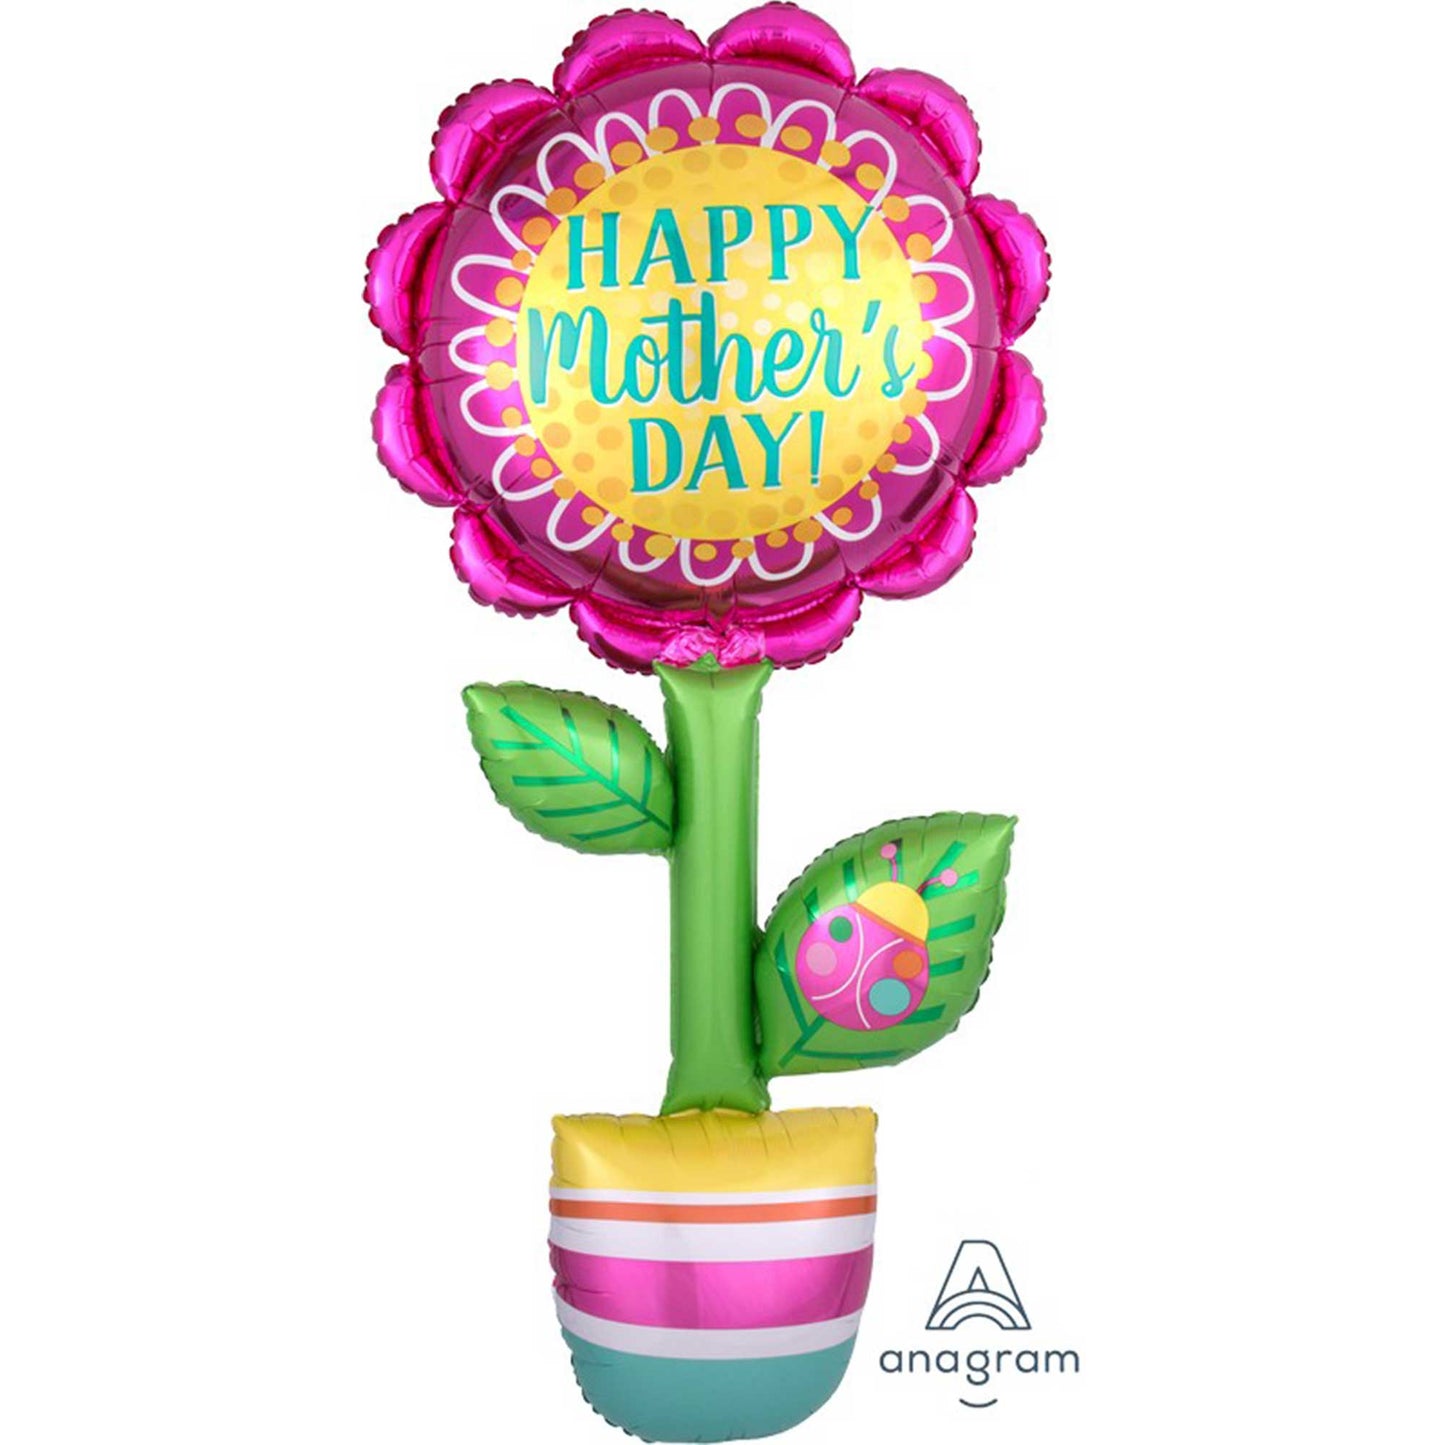 Giant Multi-Balloon Happy Mother's Day Flower P70